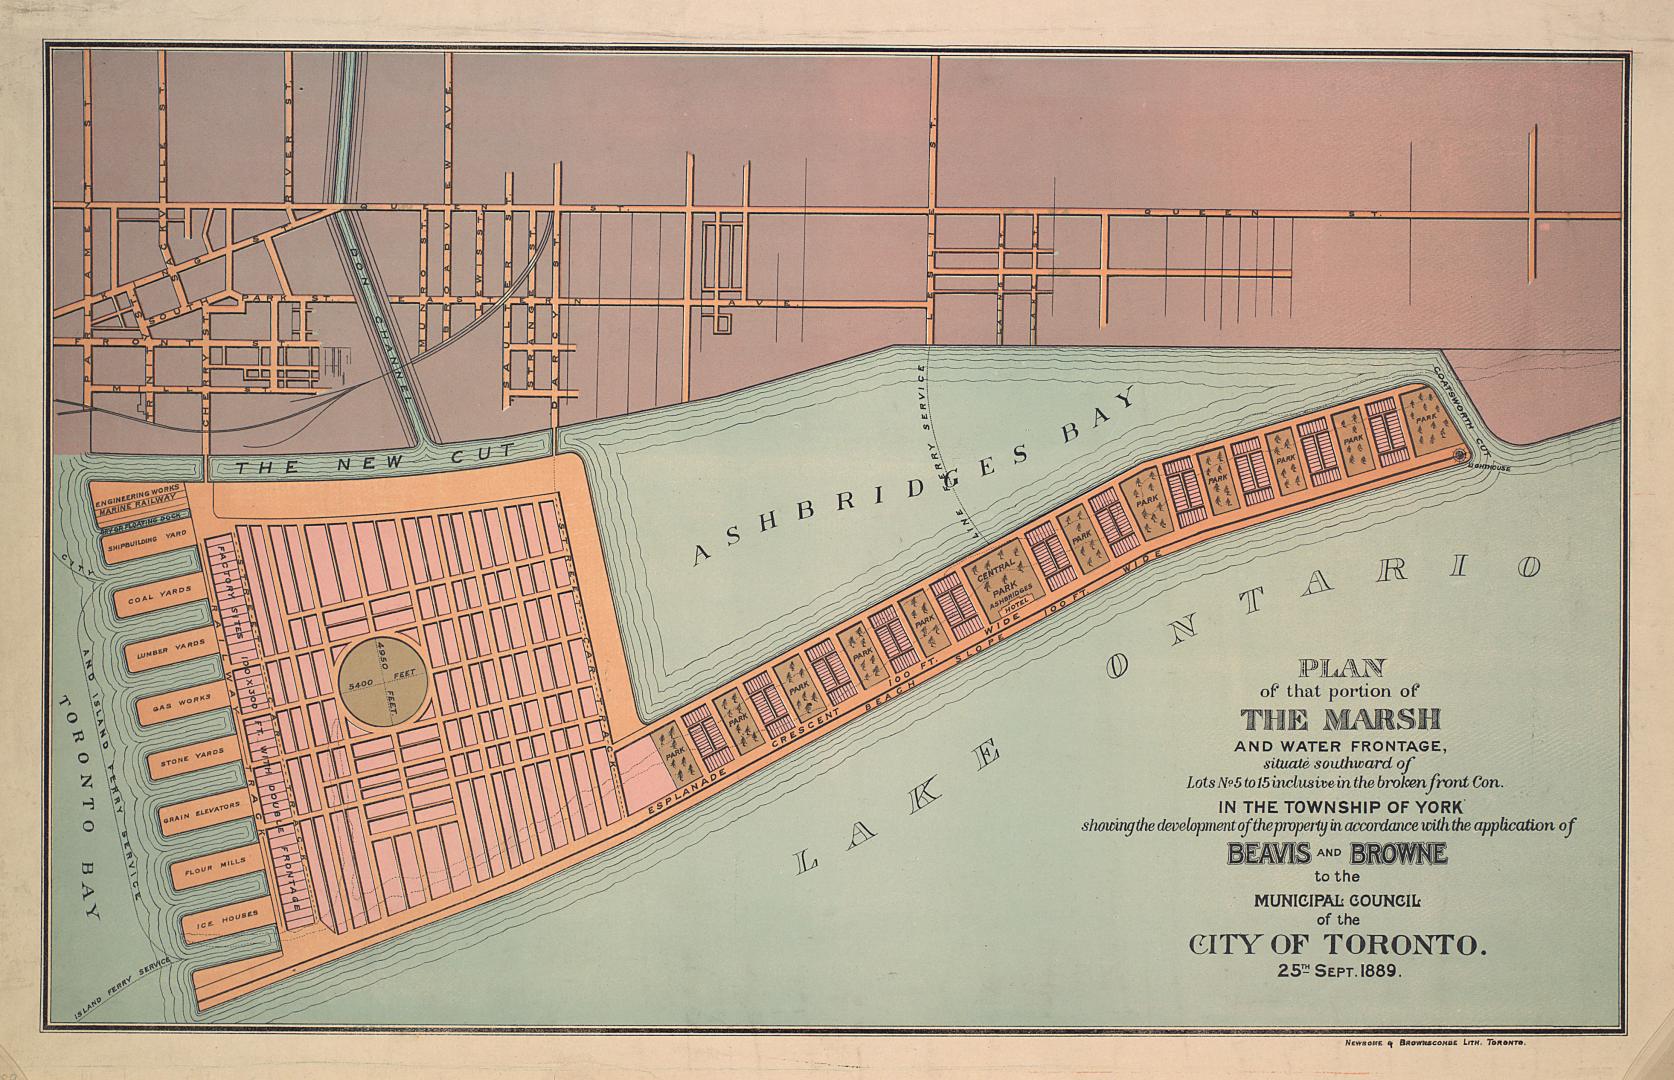 Plan of that portion of the marsh and water frontage, situate southward of lots no5 to 15 inclusive in the broken front con. in the township of York 